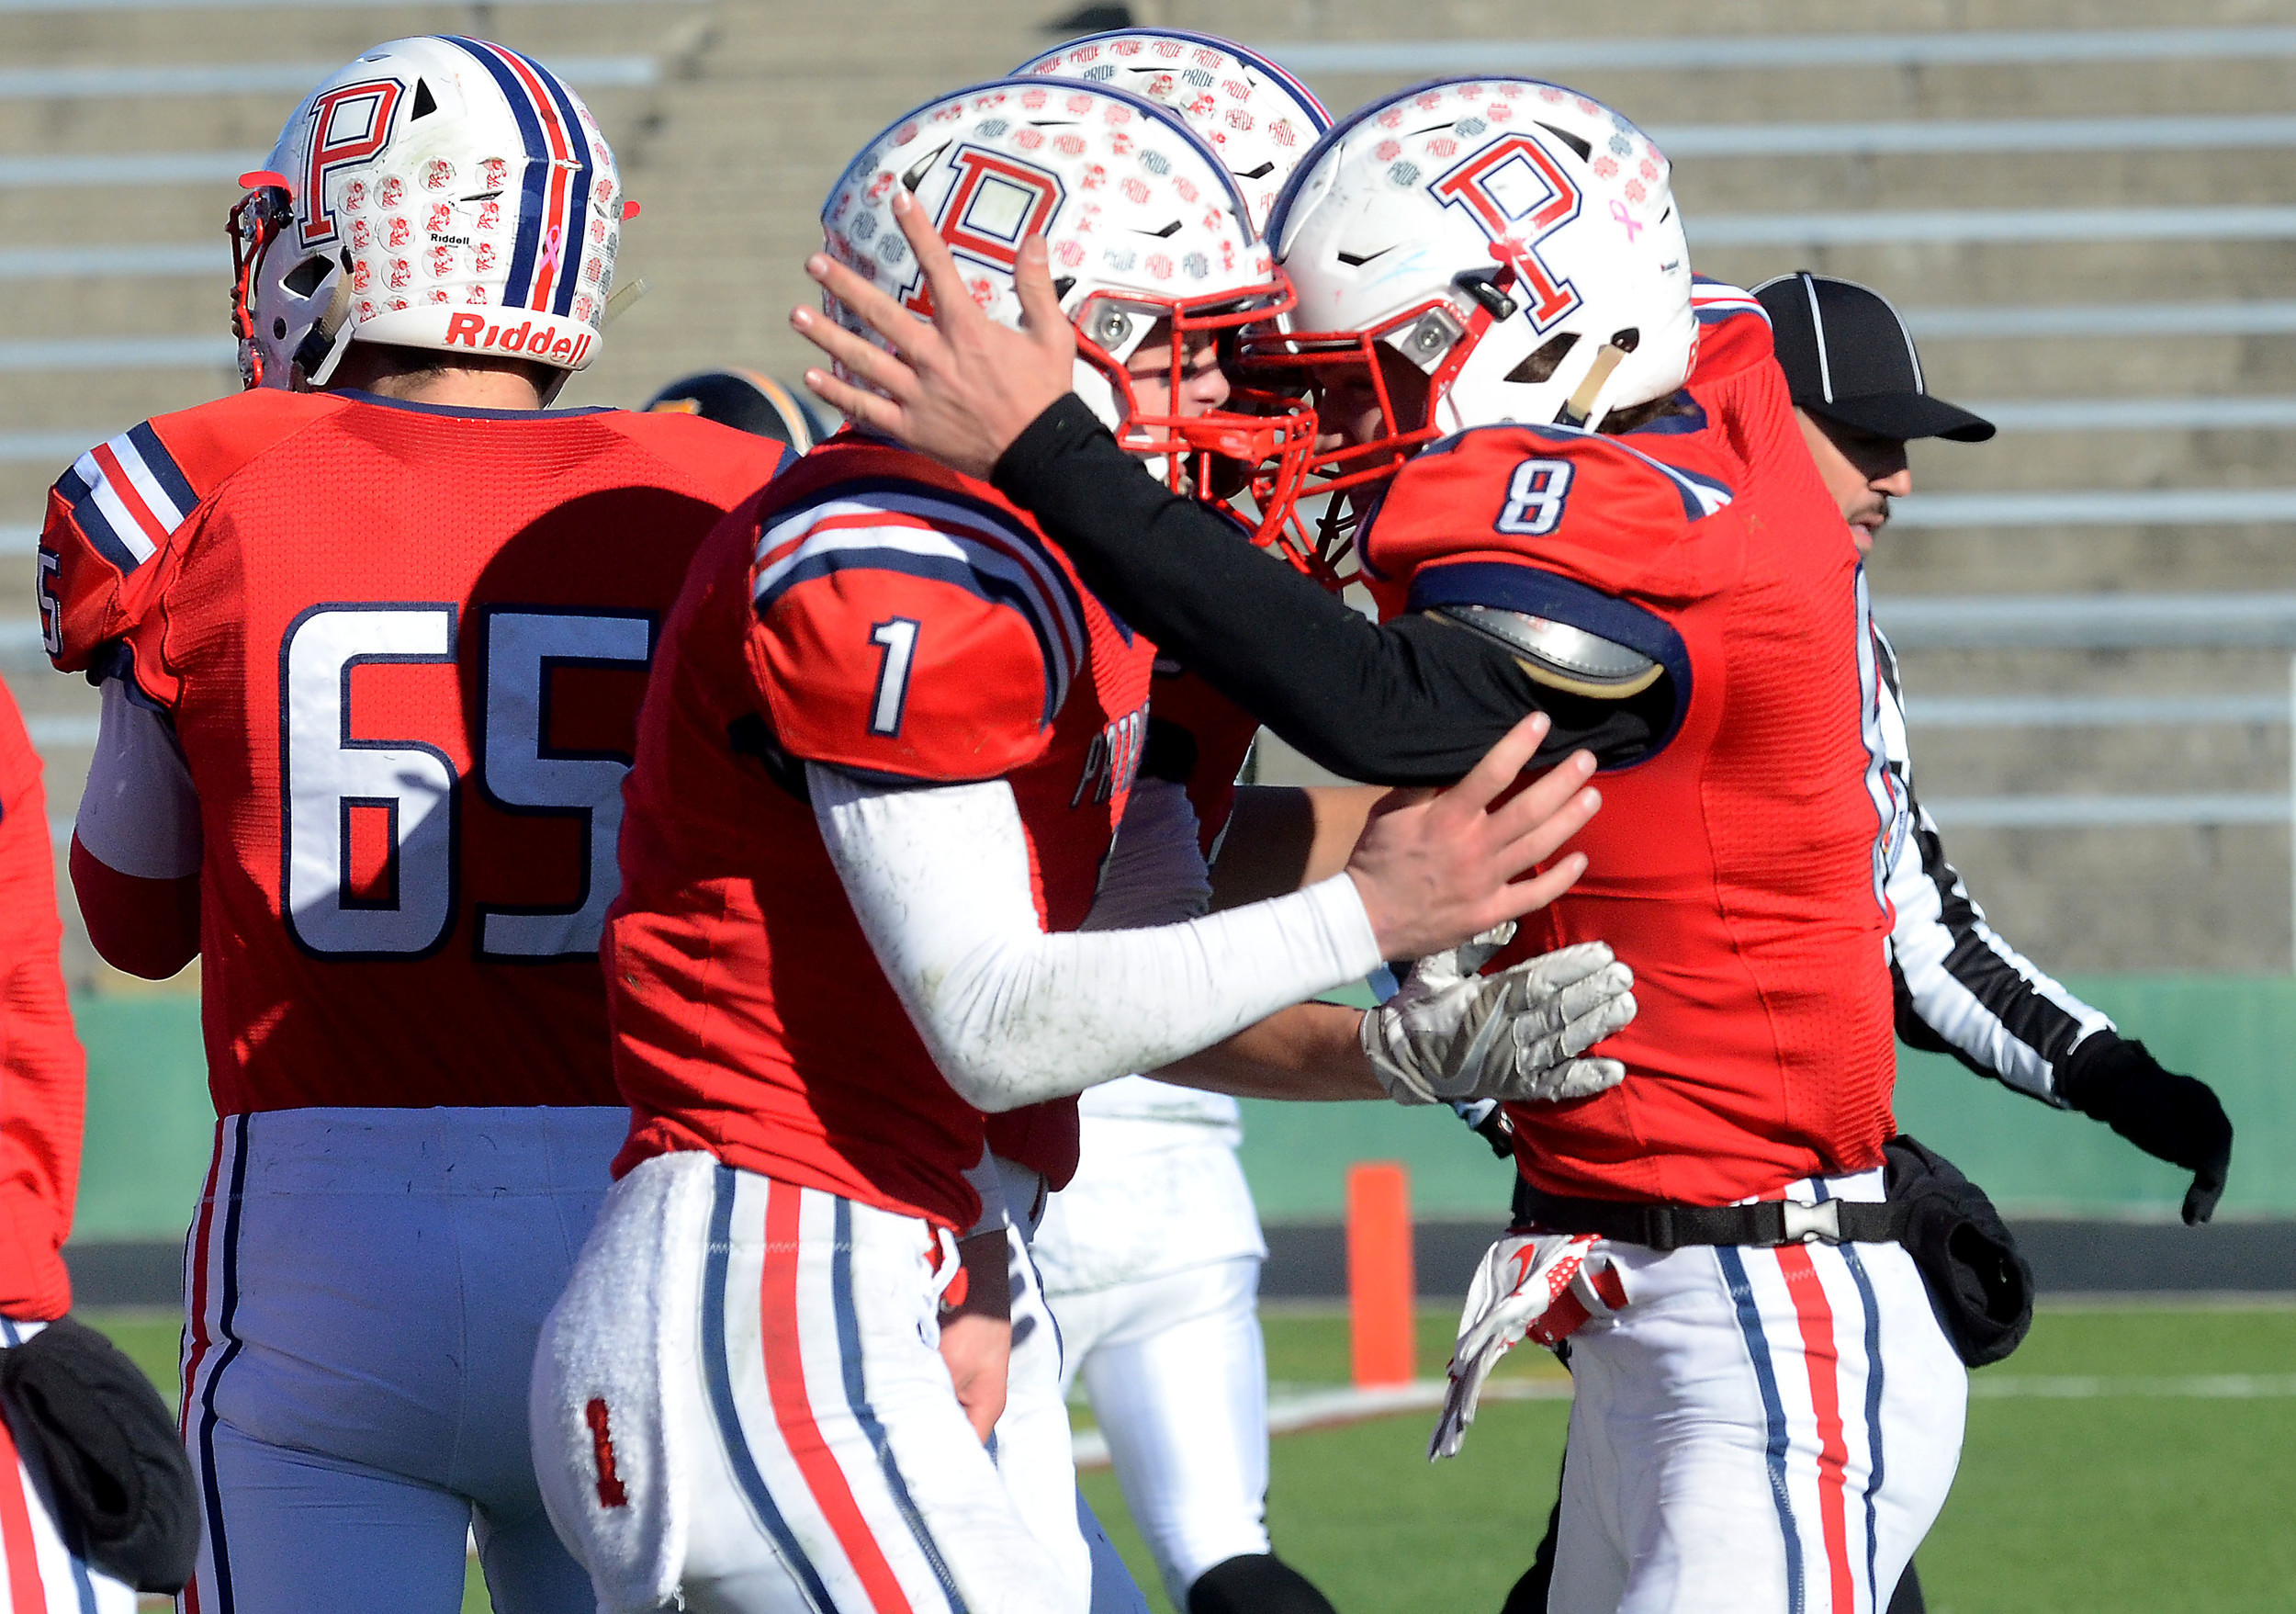 Sean Coyne celebrates with Peyton Robinson after Robinson scored a touchdown in the first half.